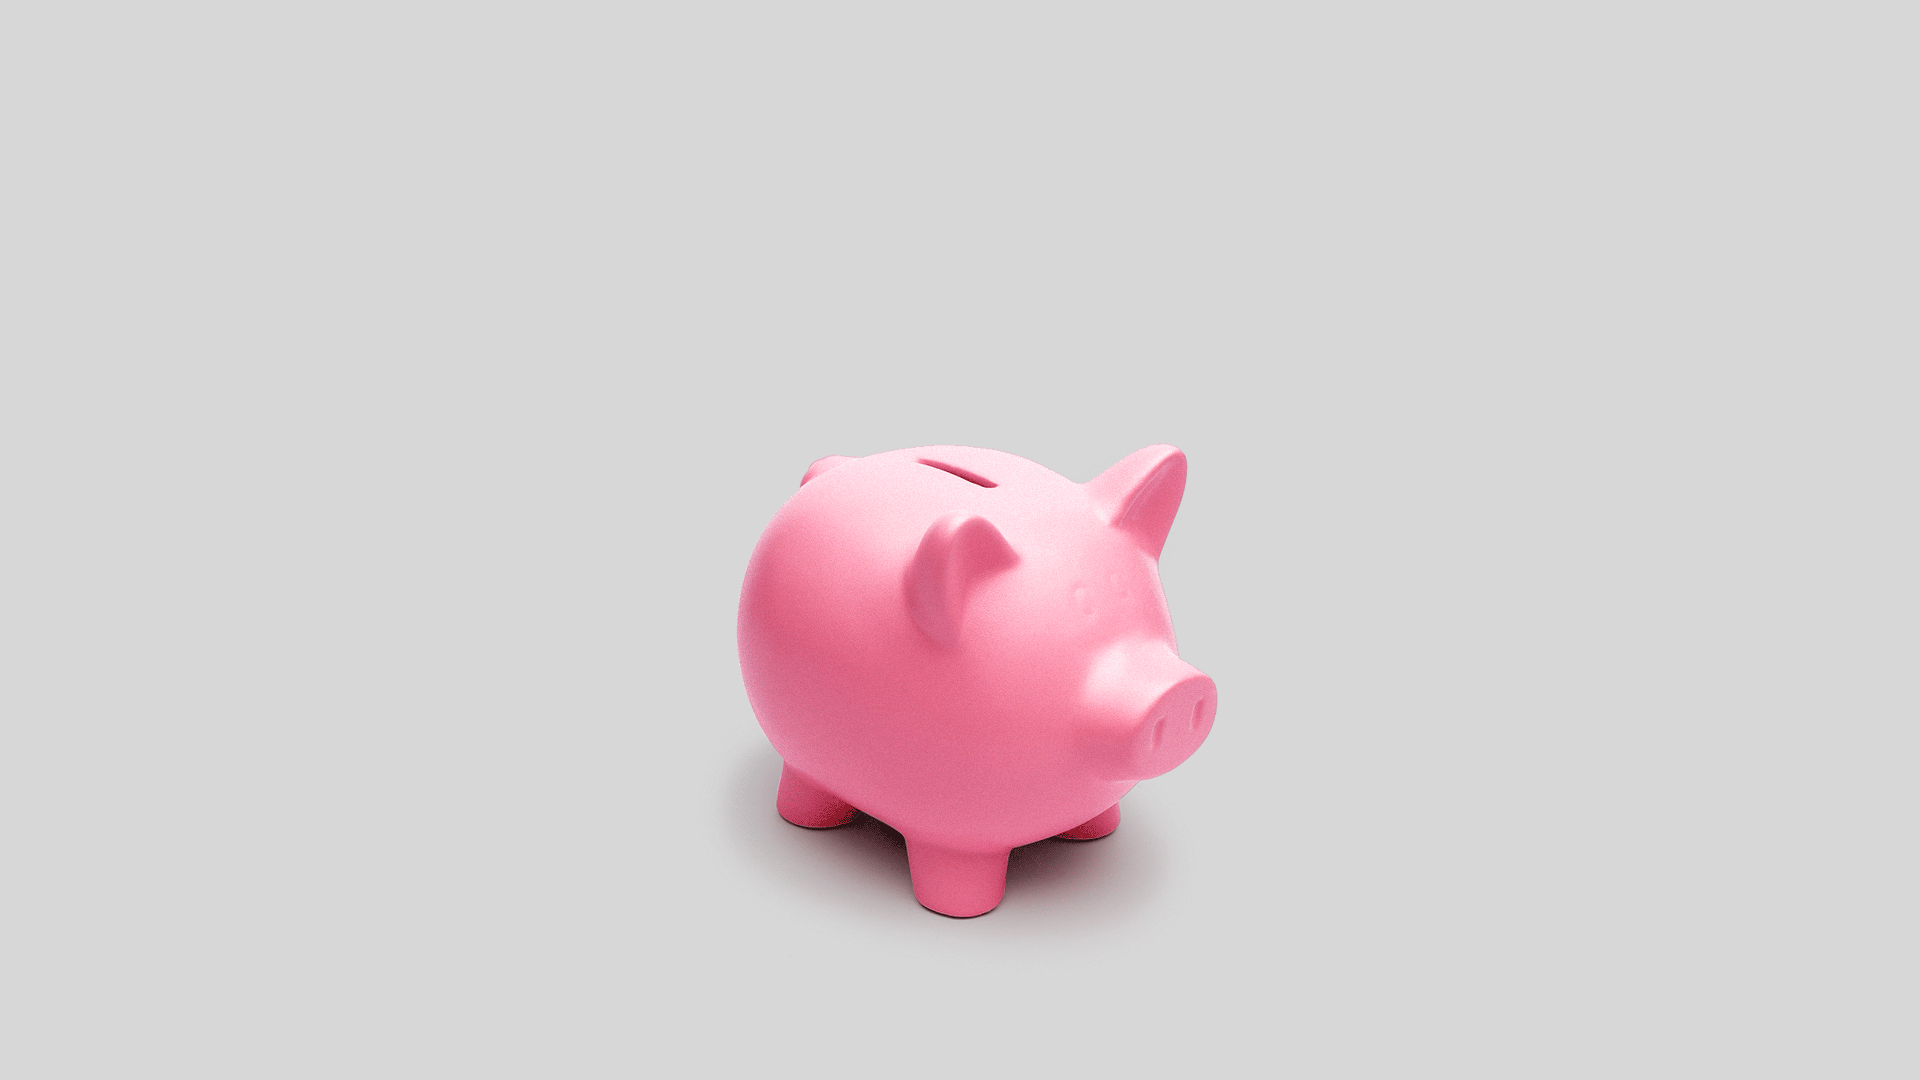 Animated illustration of a piggy bank with thought bubble of dollar signs.